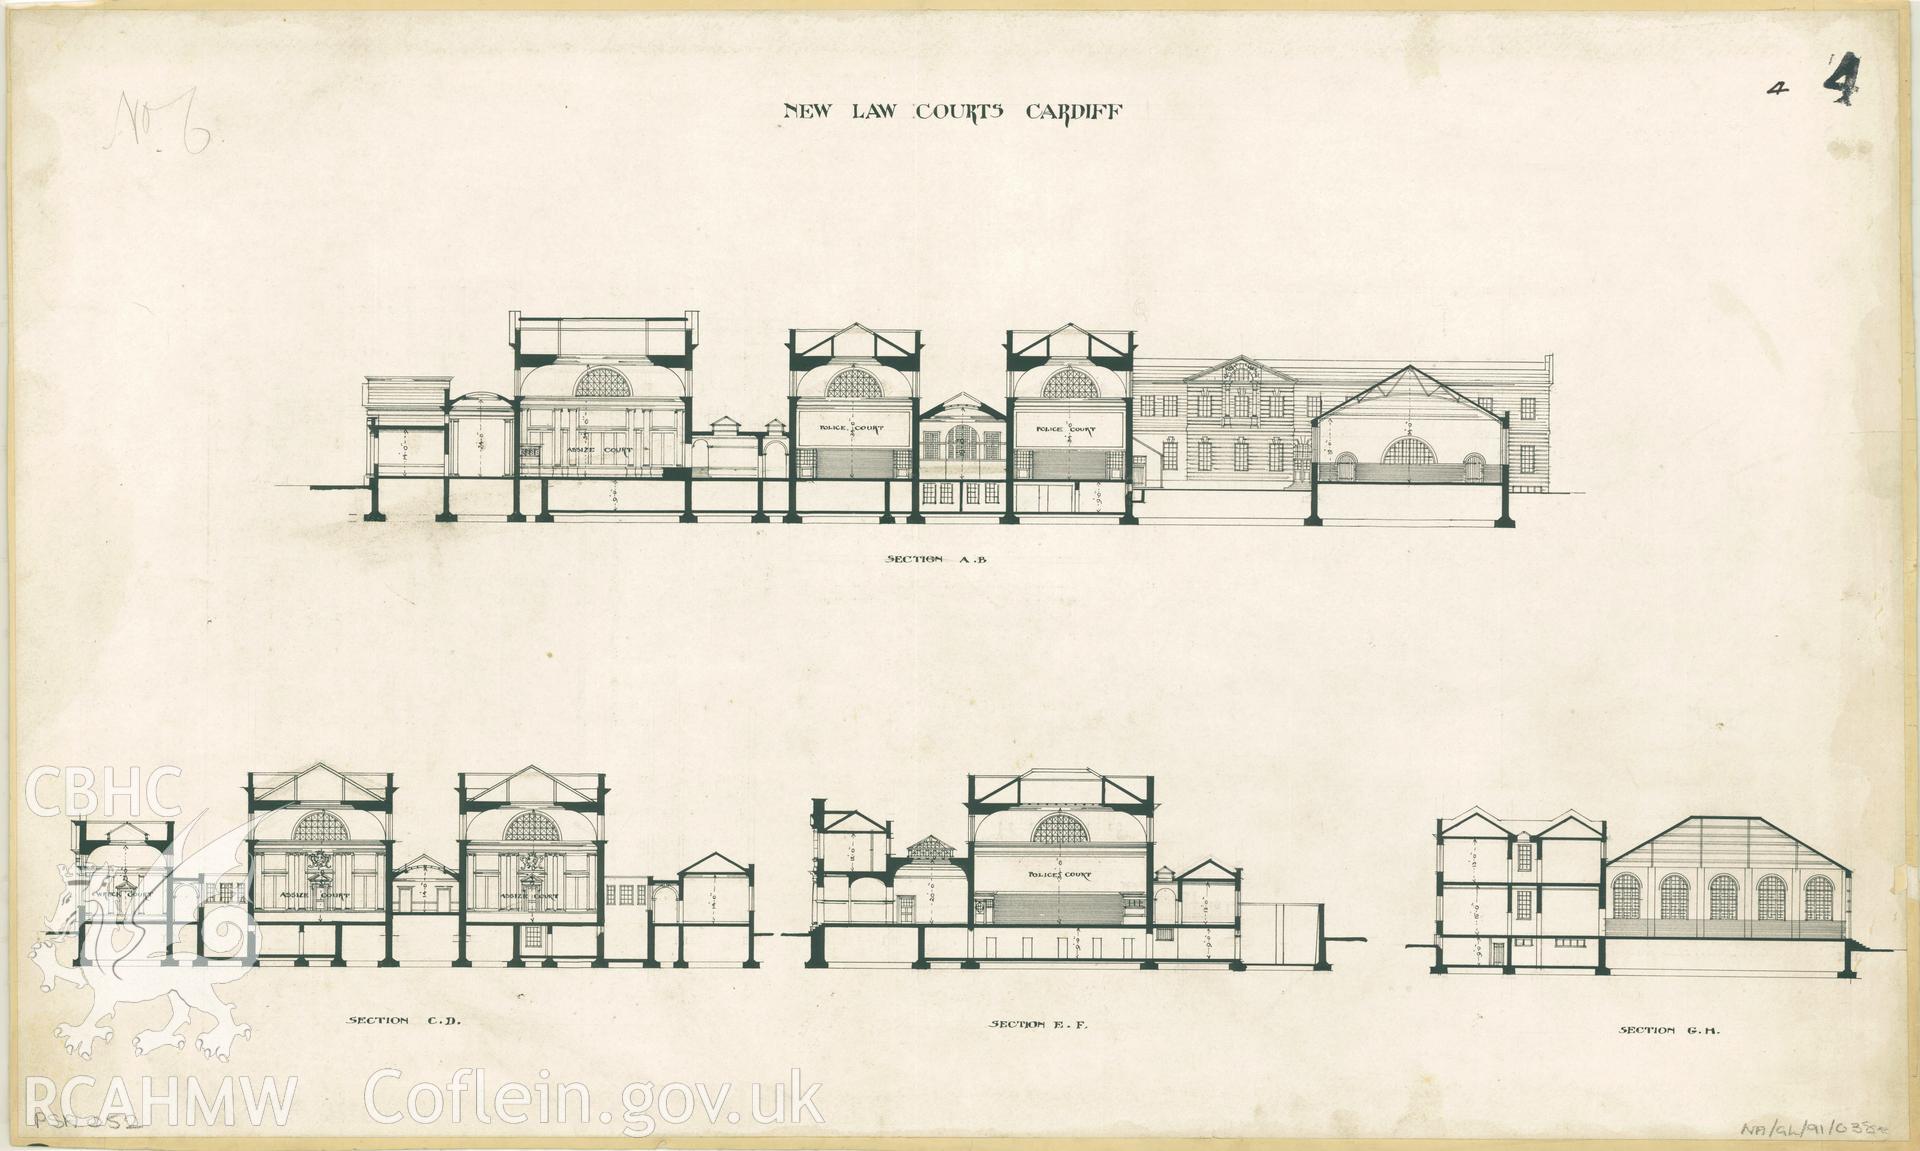 Law Court, Cathays Park, Cardiff; measured drawing showing proposed section views, submitted as  an entry in the 1897 competition to produce a design for the new Law Court.